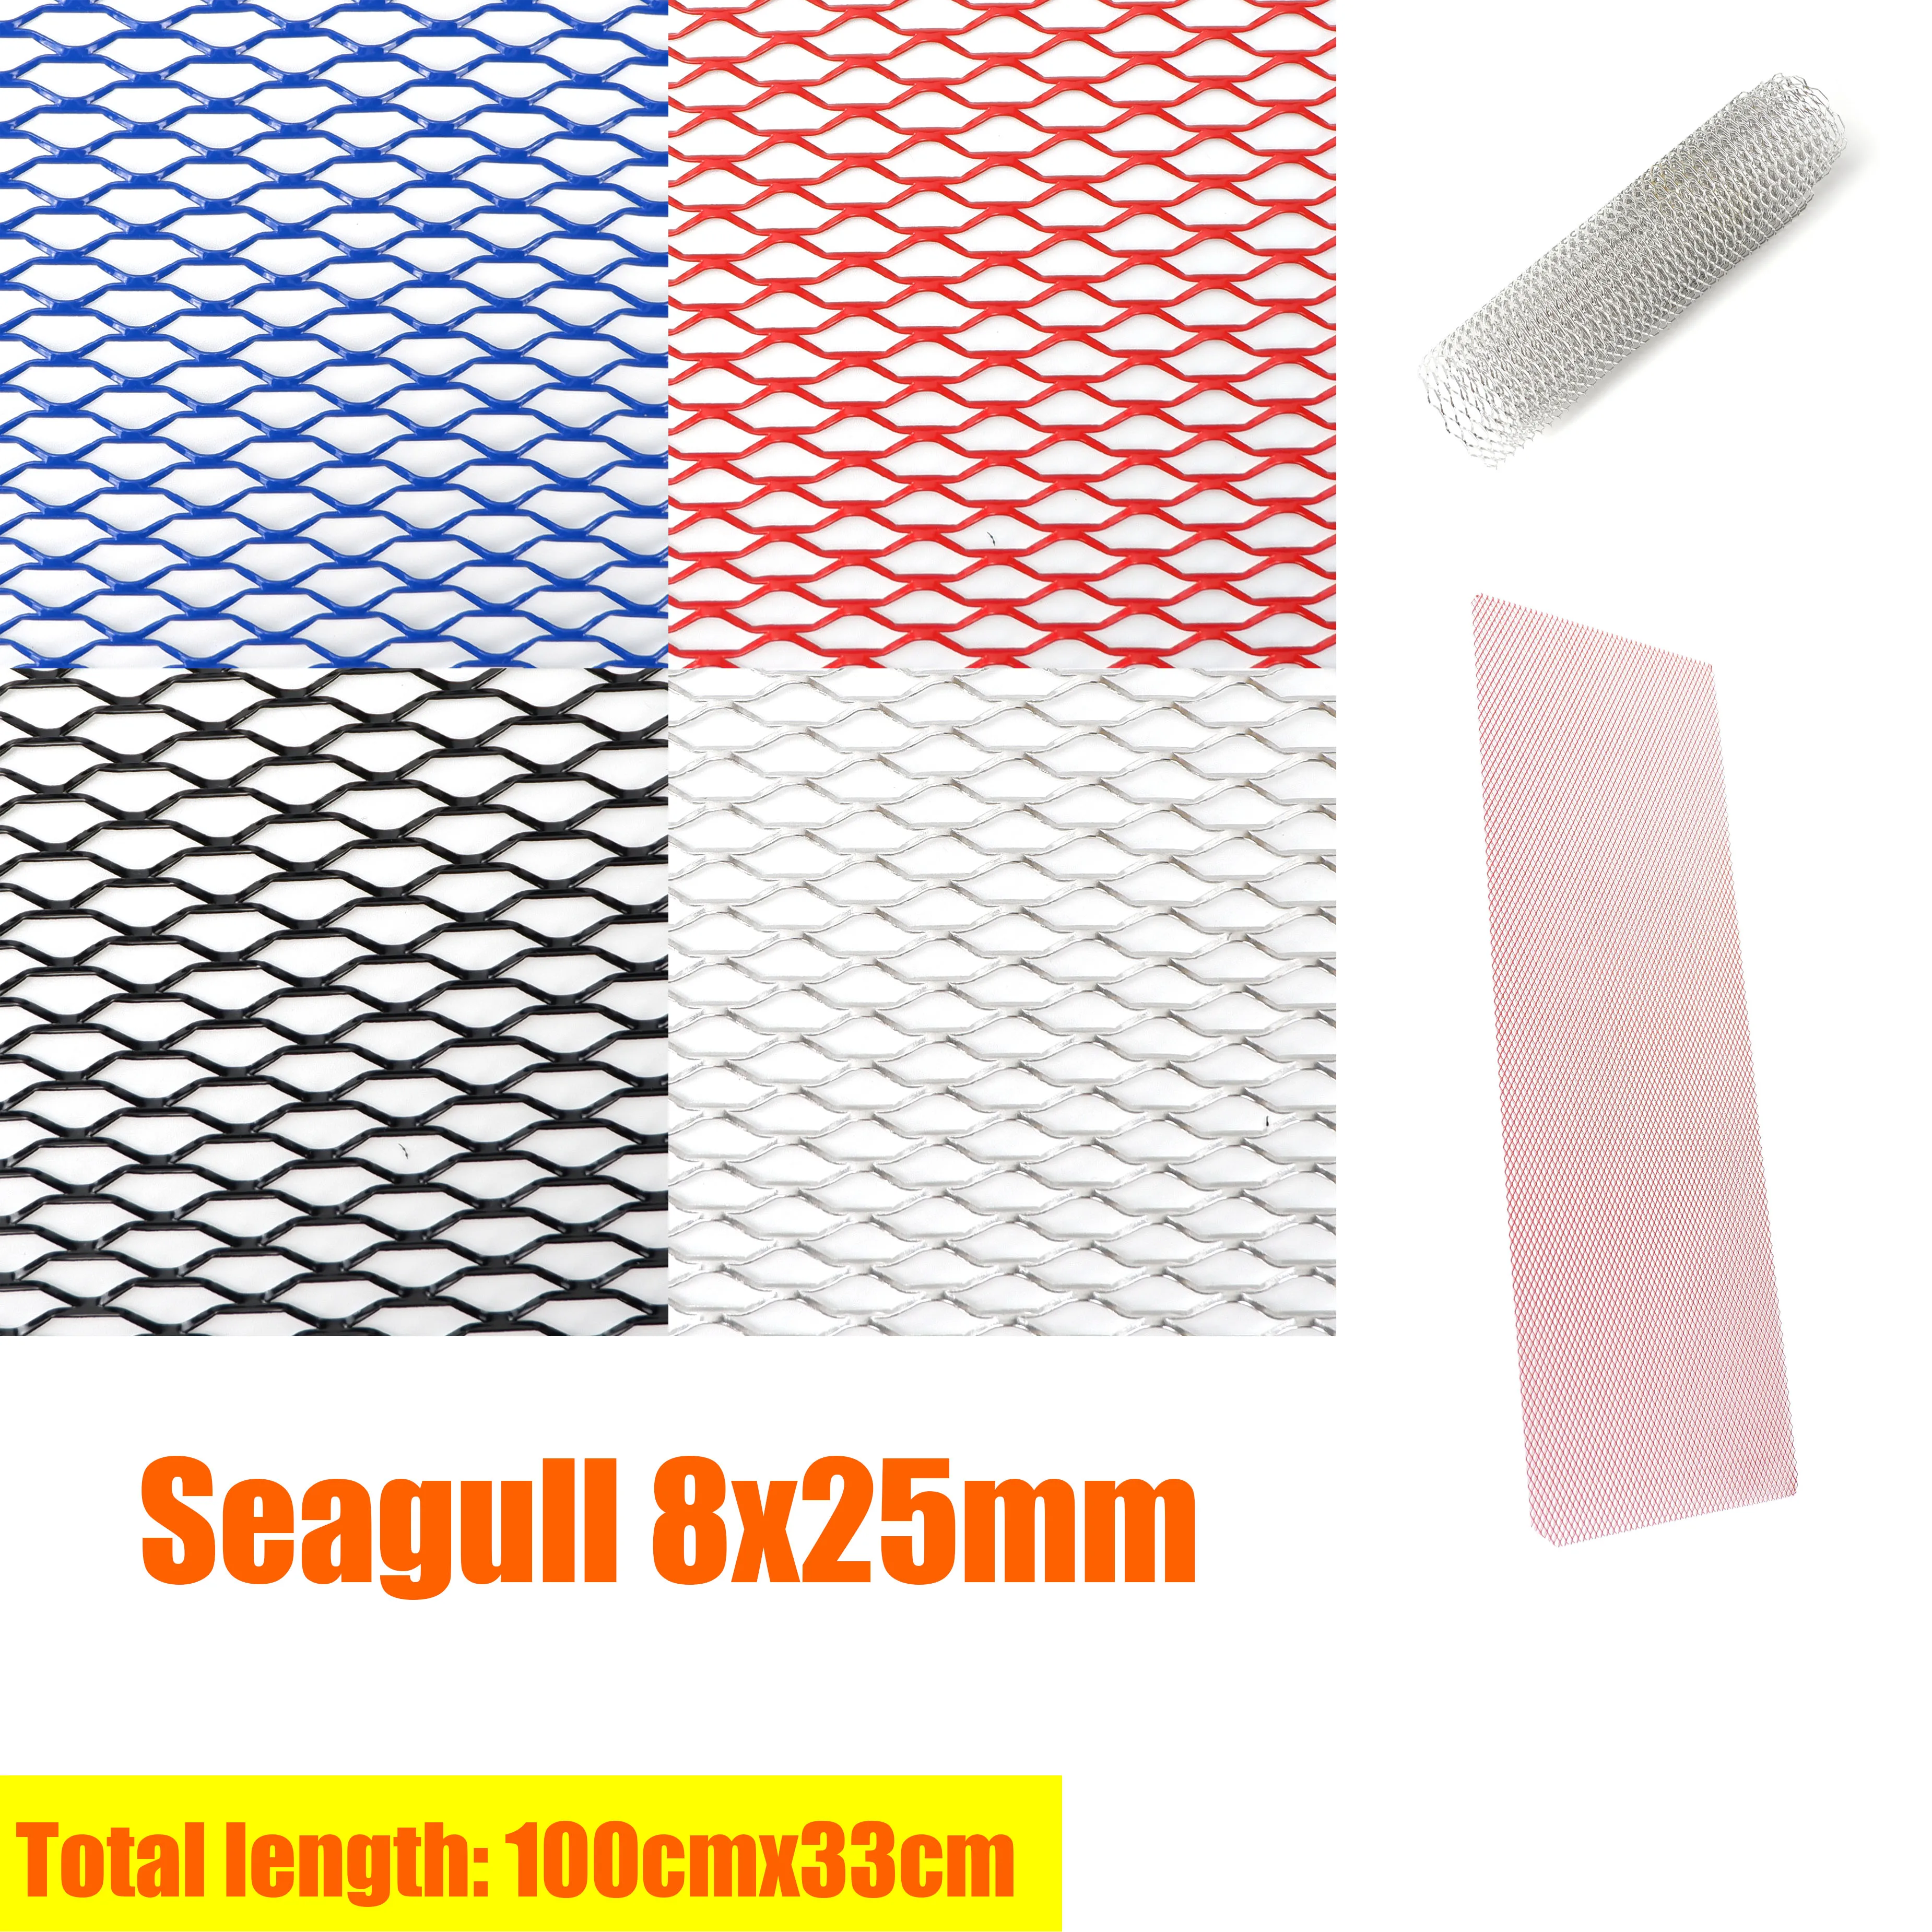 100x33cm Seagull Hole 【8x25mm】 Aluminium Racing Car Bumper Grille Grill Mesh Net Vent Black Silver Red Blue Tuning Universal